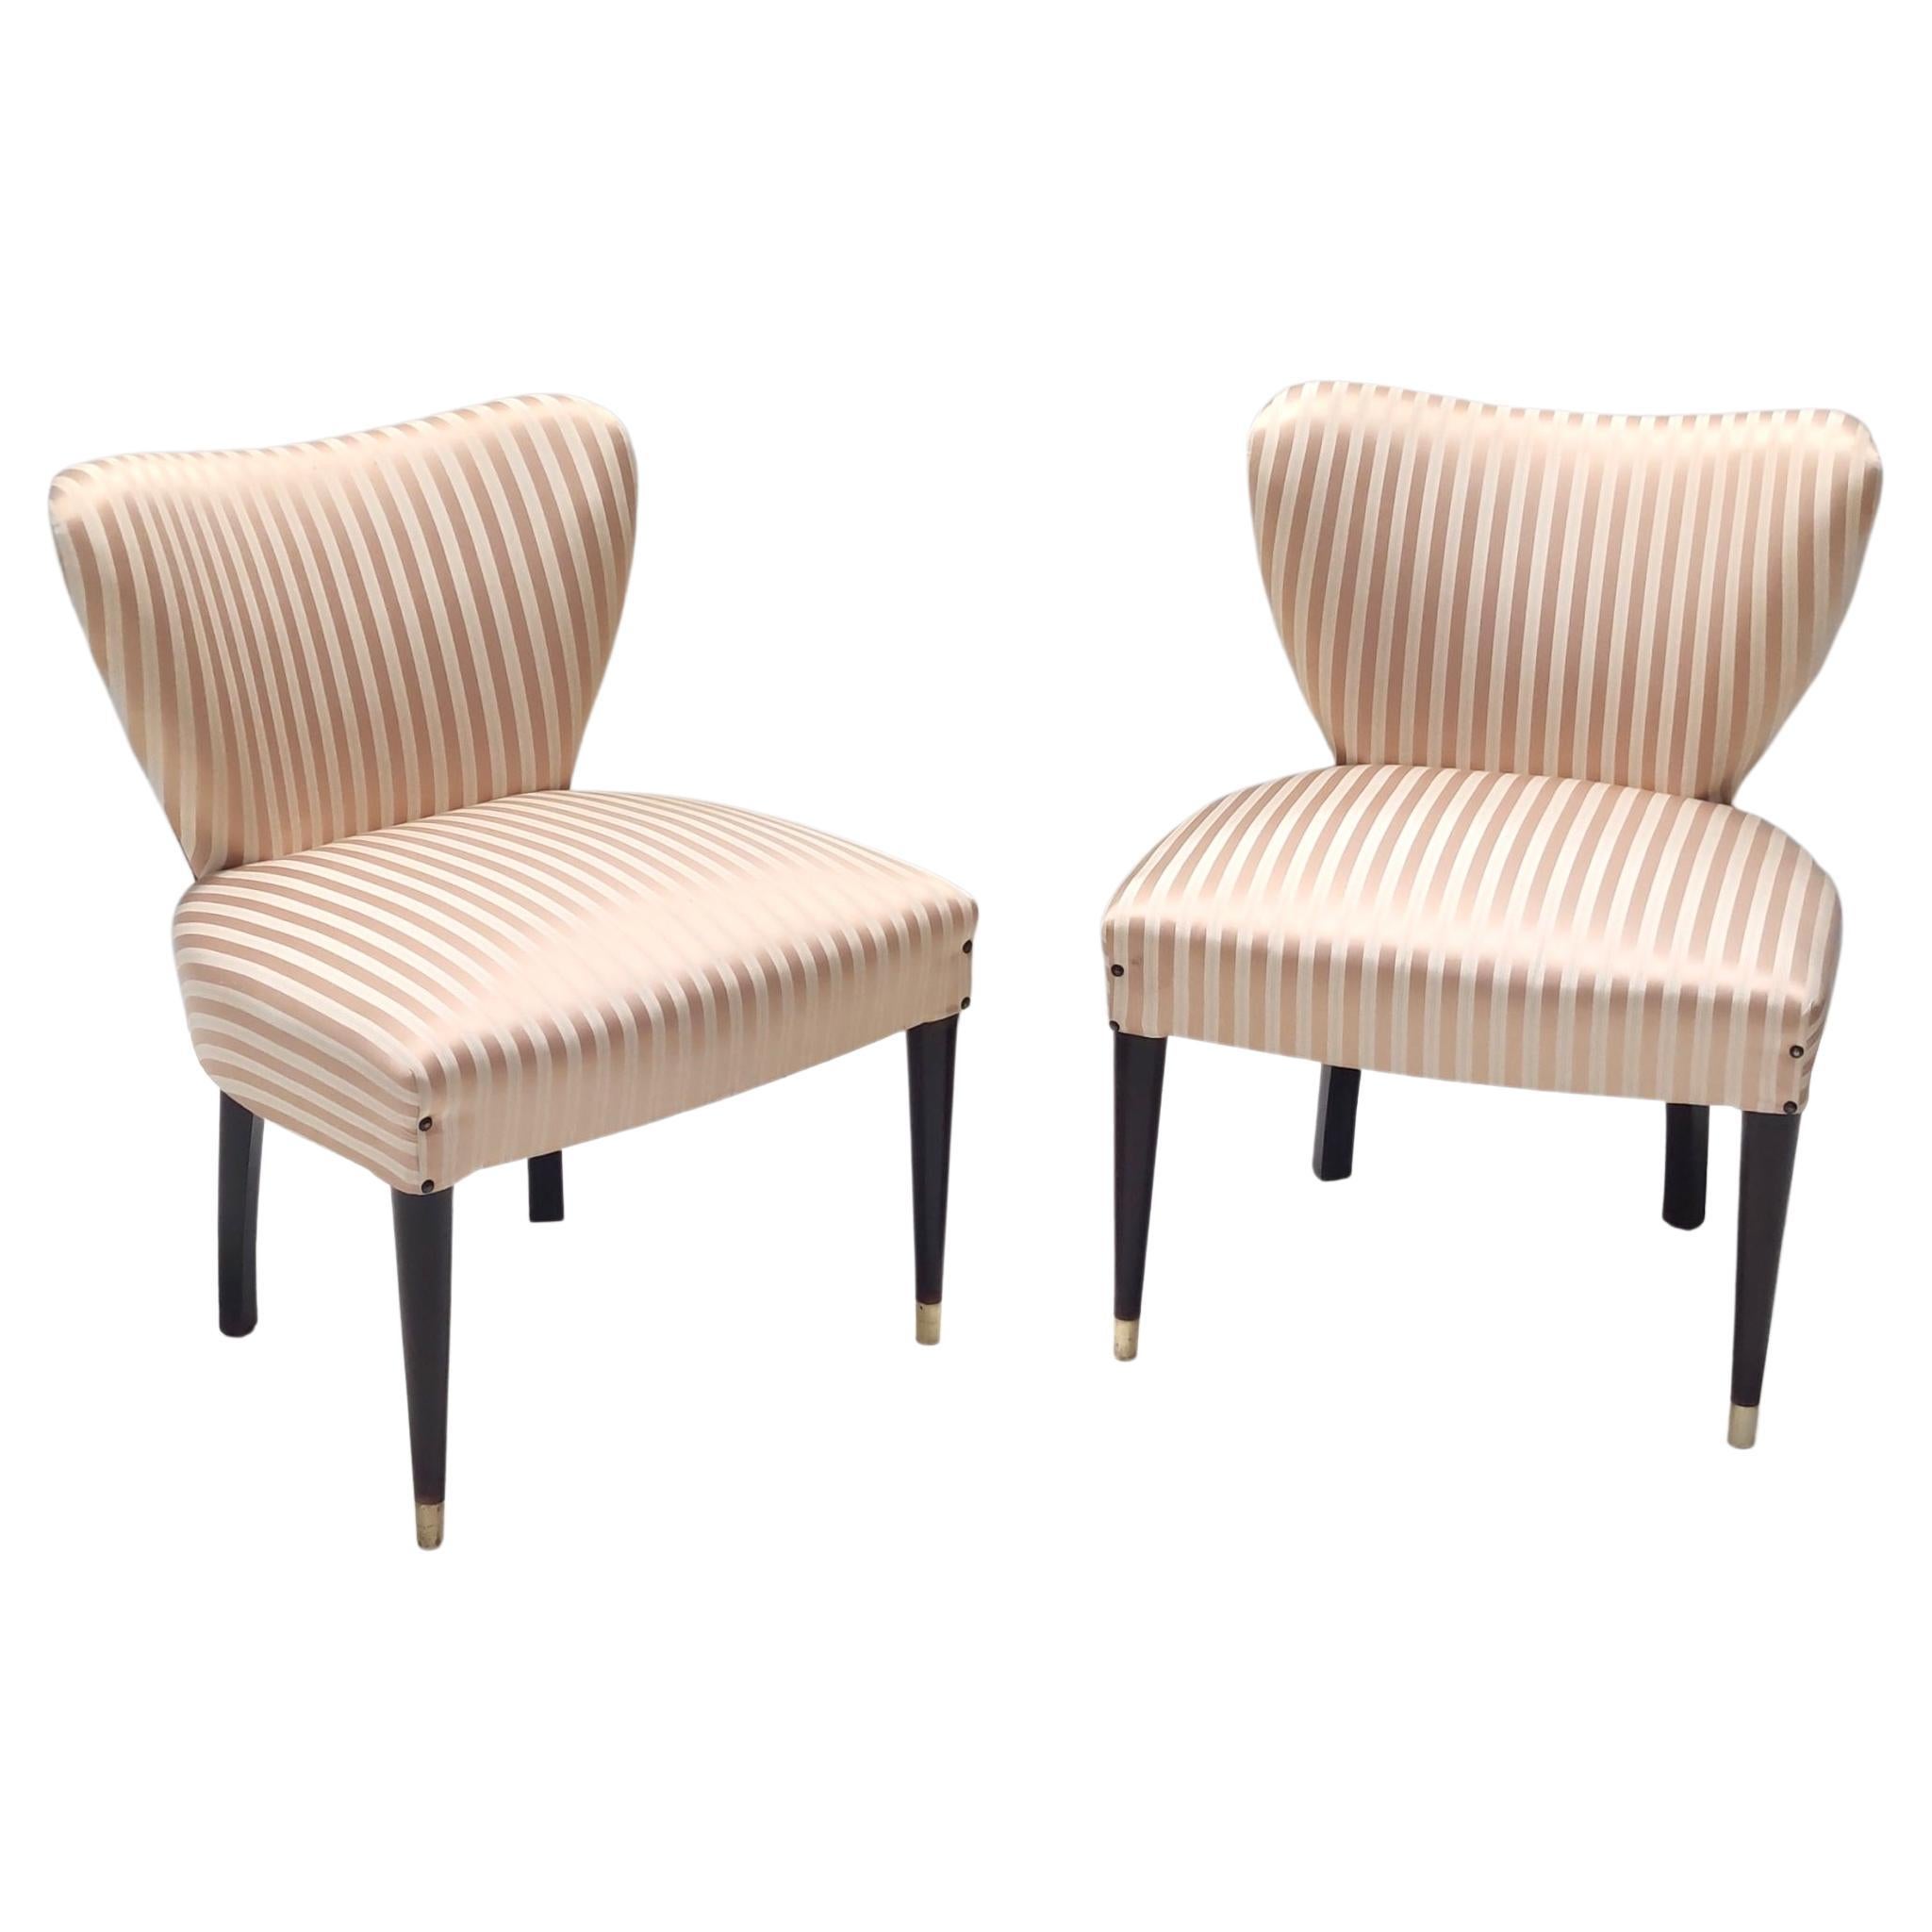 Pair of Vintage Pinkish Tan Satin Side Chairs Ascribable to Carlo Enrico Rava For Sale